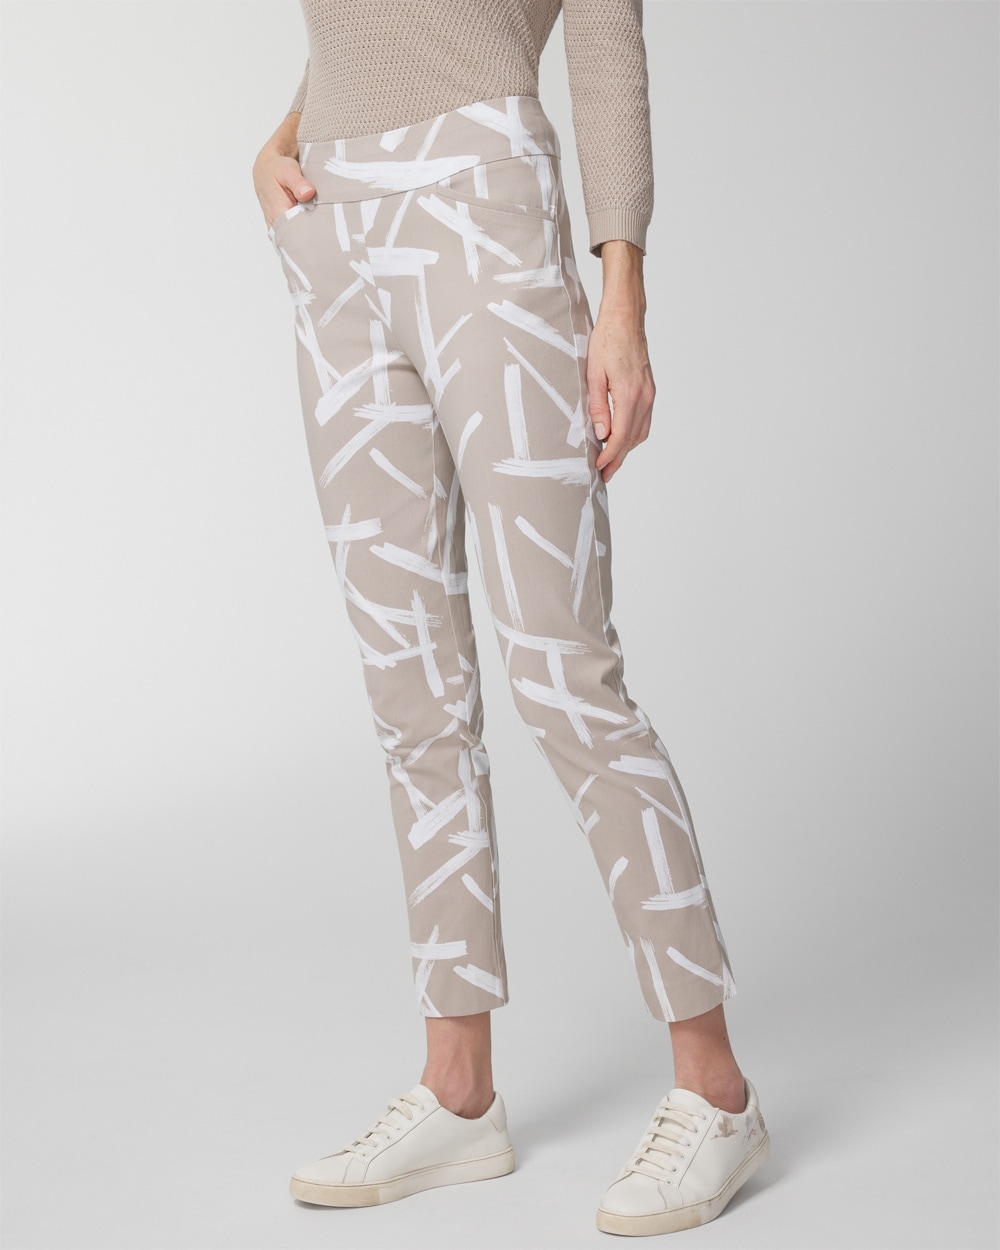 Chopsticks Perfect Stretch Josie Slim Ankle Pants - Chico's Off The Rack -  Chico's Outlet